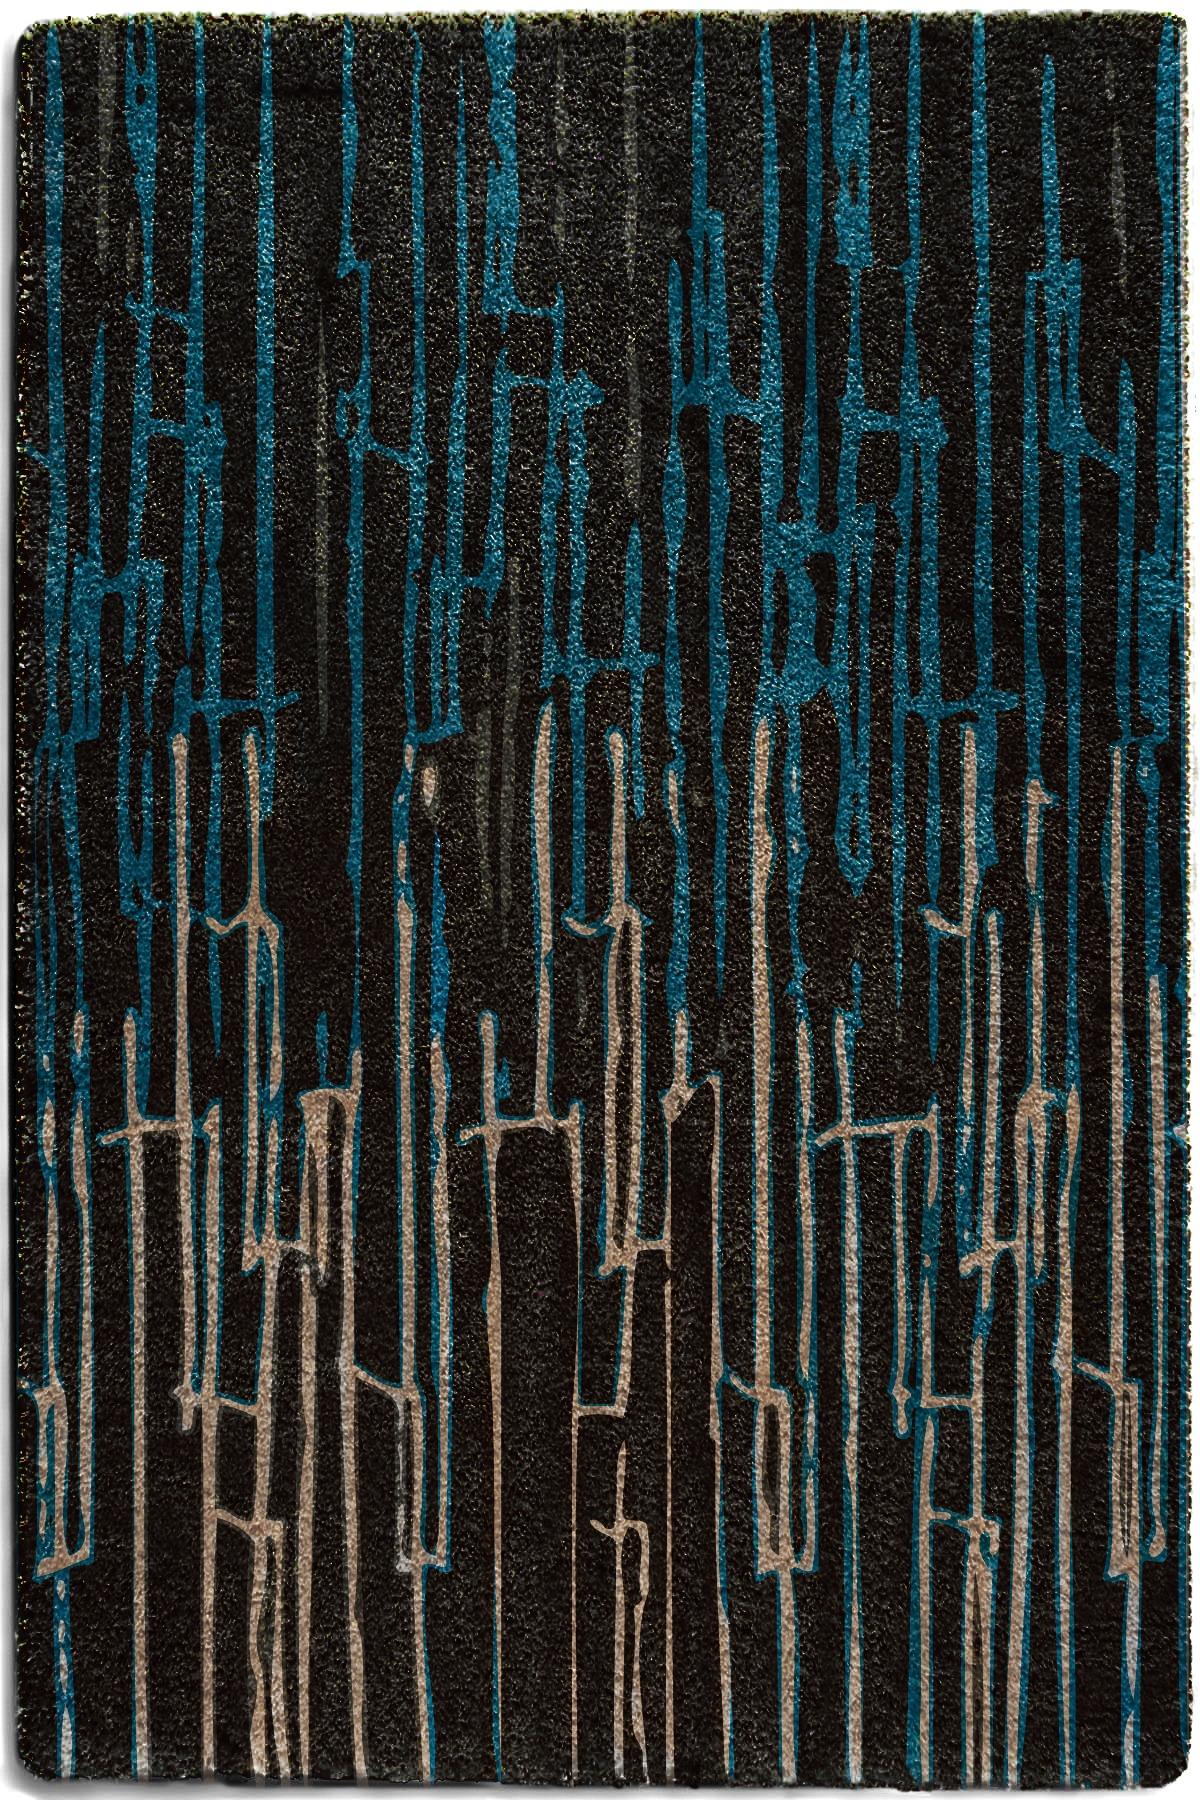 Portuguese Kasai Hand-Tufted Tencel Rug in Blue and Brown For Sale